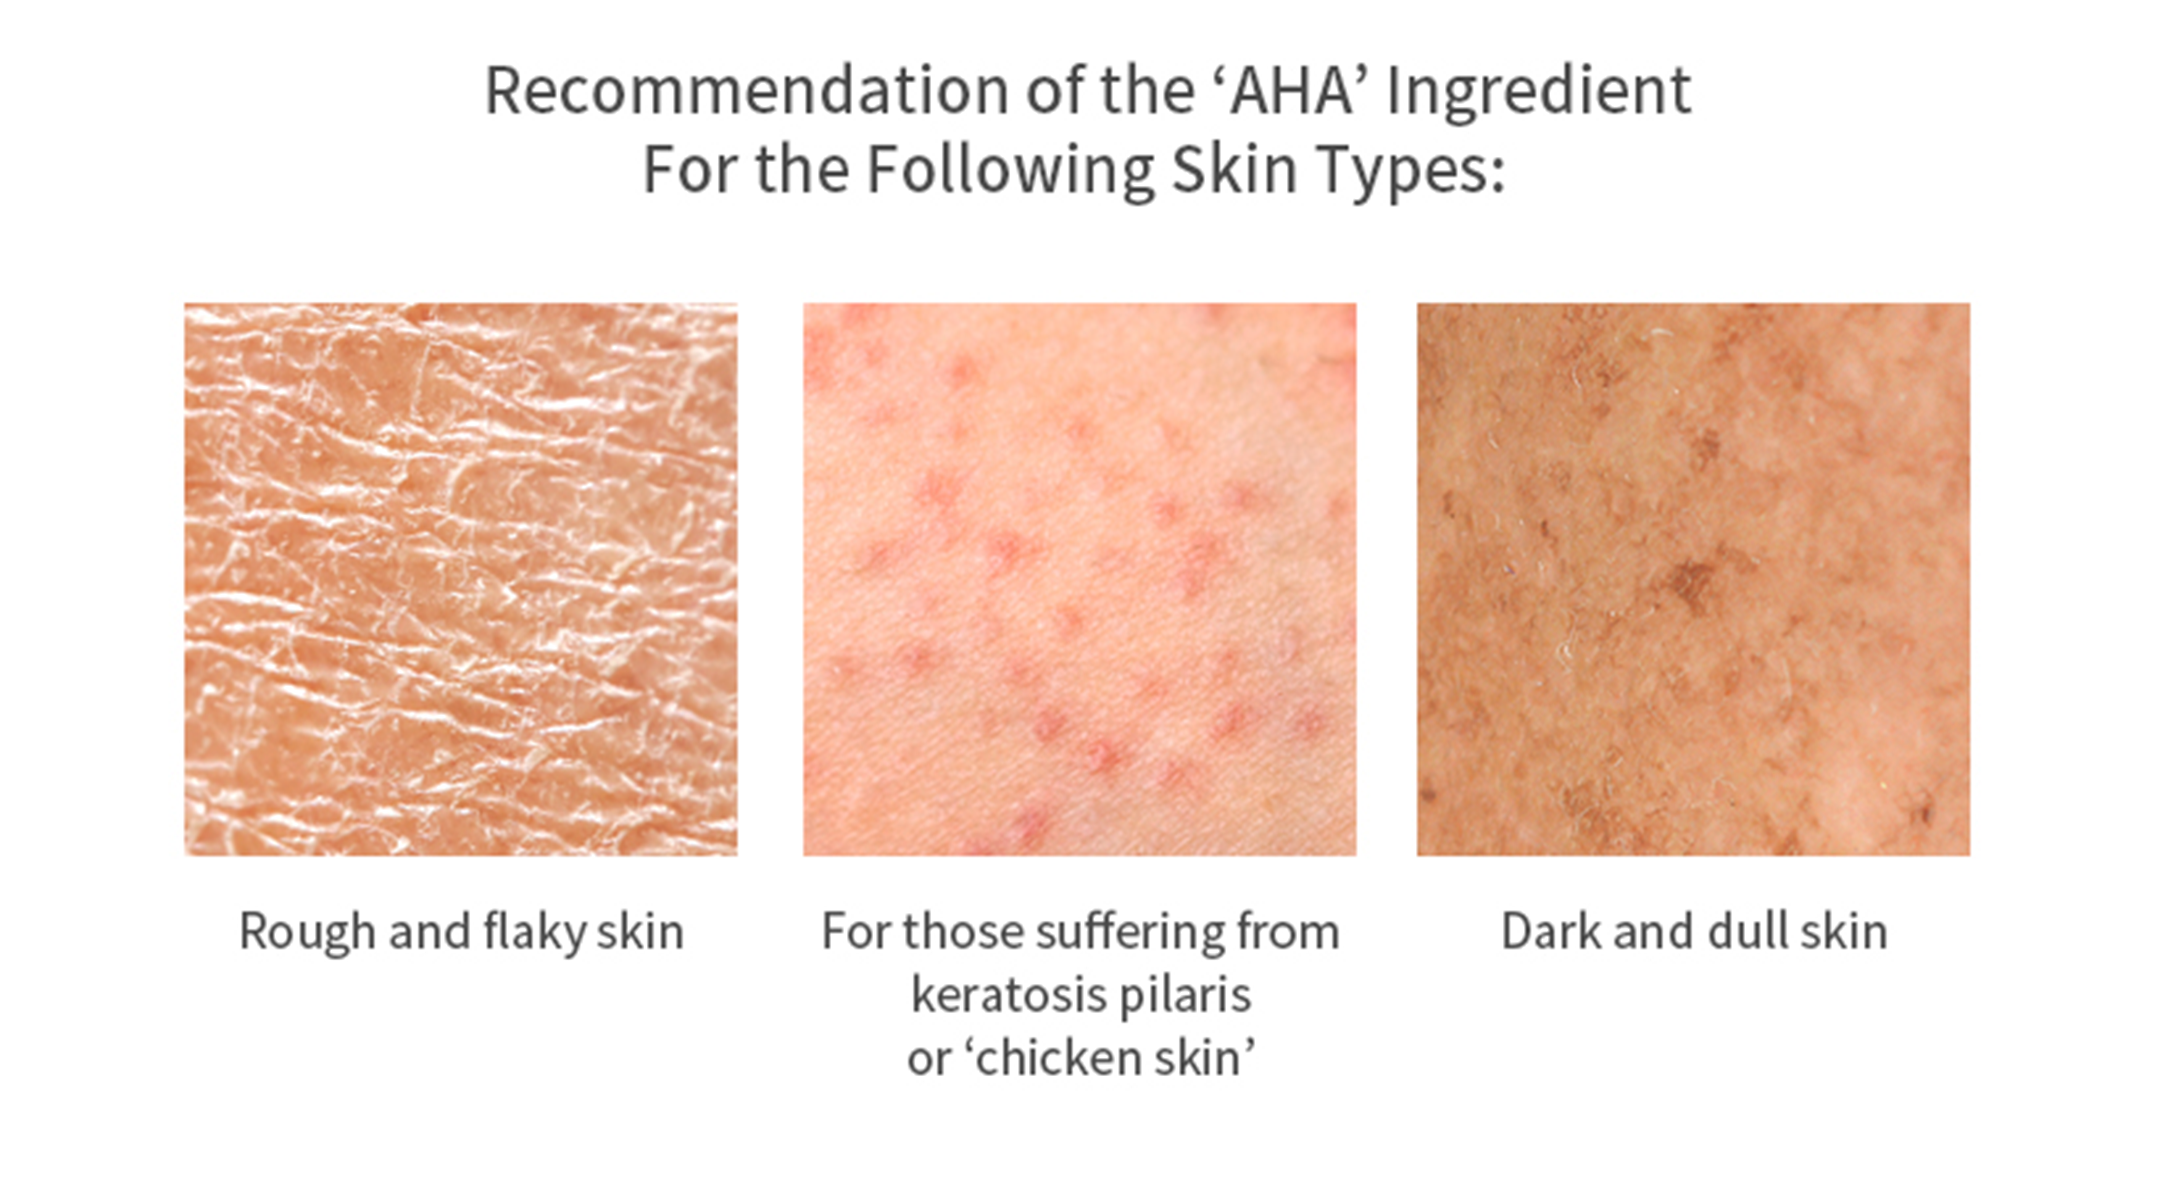 recommendation of the AHA ingredient for the following skin types